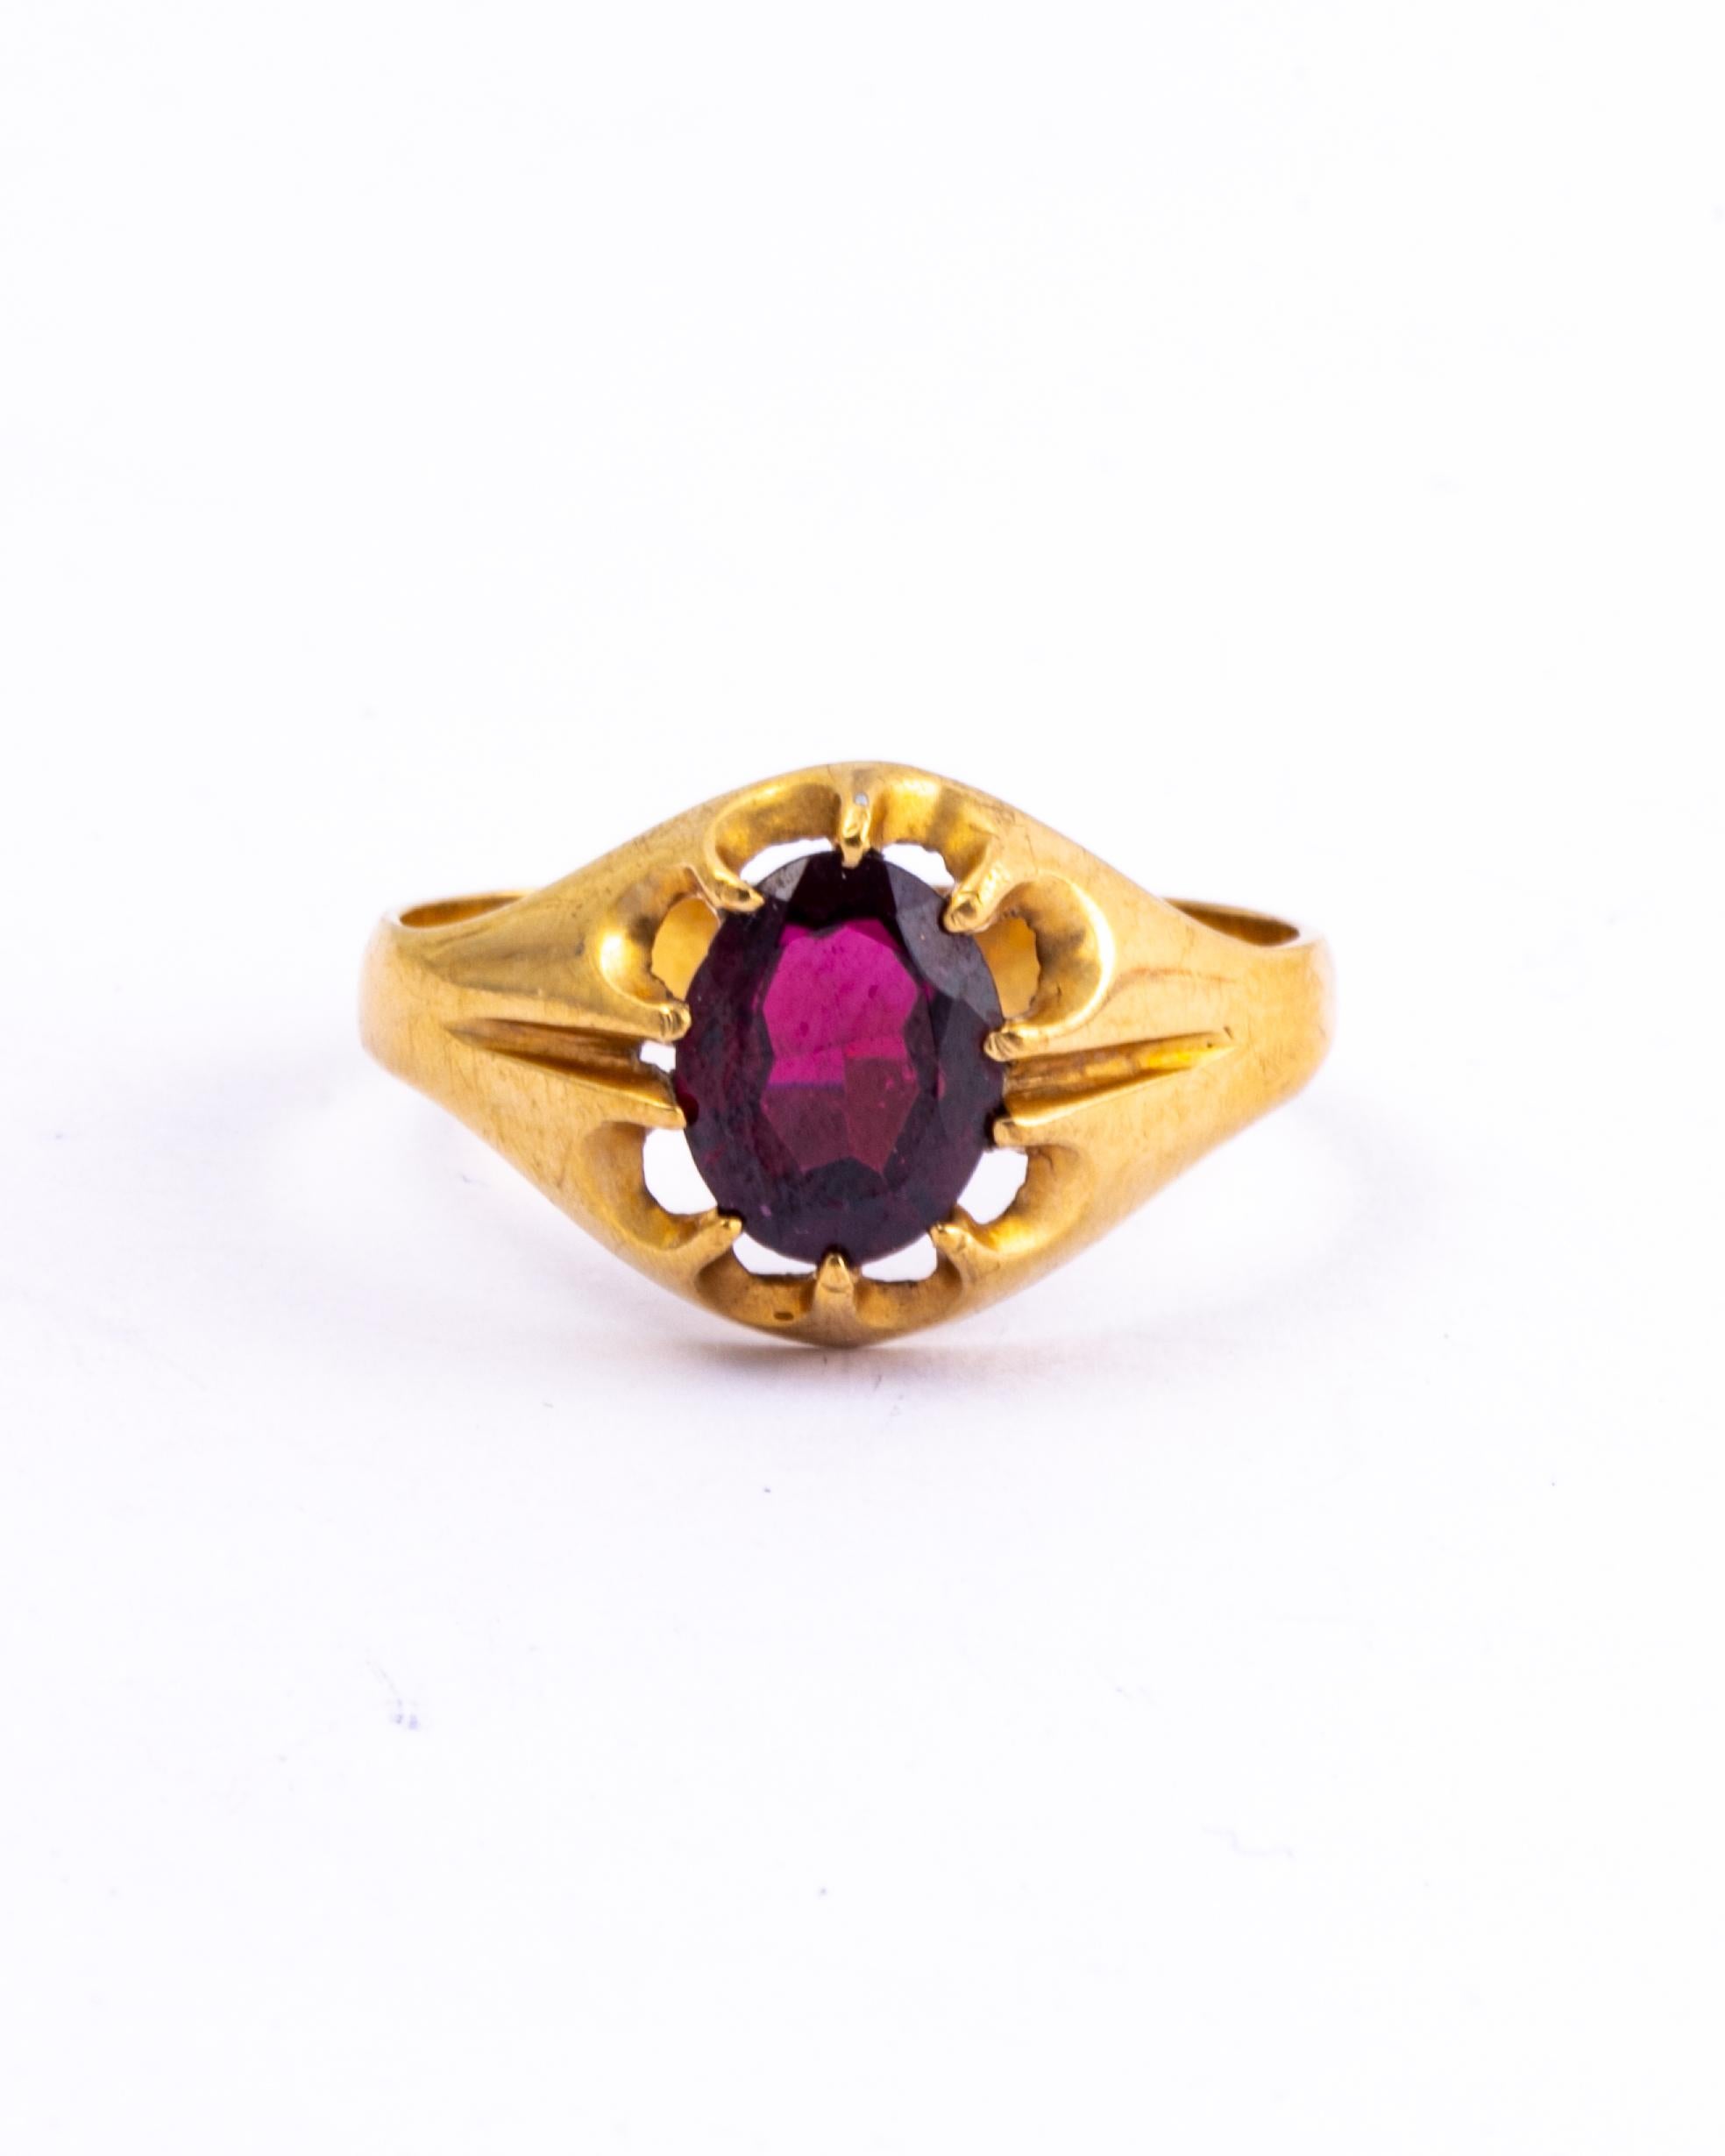 This simple style signet ring holds a garnet stone measuring approx 1.5carat.  Made in Birmingham, England. 

Ring Size: S or 9 
Stone Dimensions: 9x7mm

Weight: 2.8g